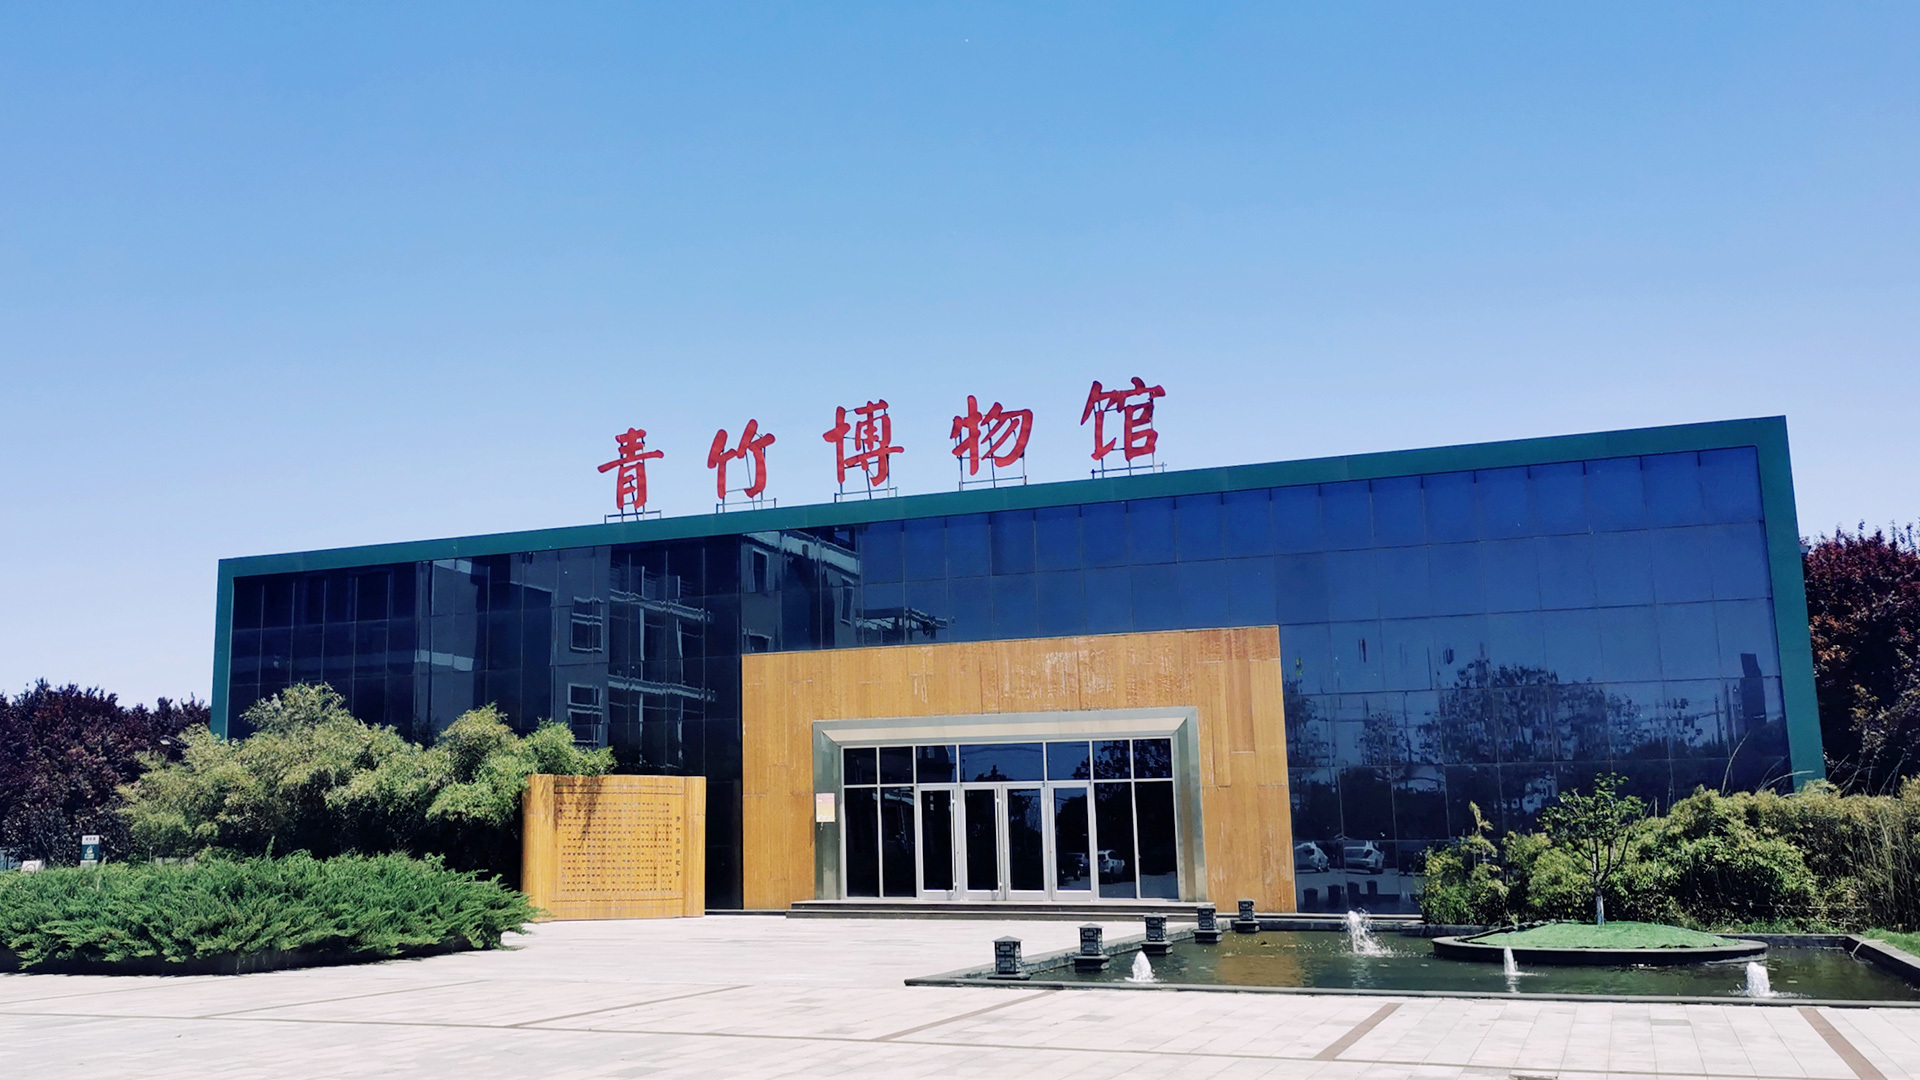 THE FIRST ART PAINT MUSEUM IN CHINA